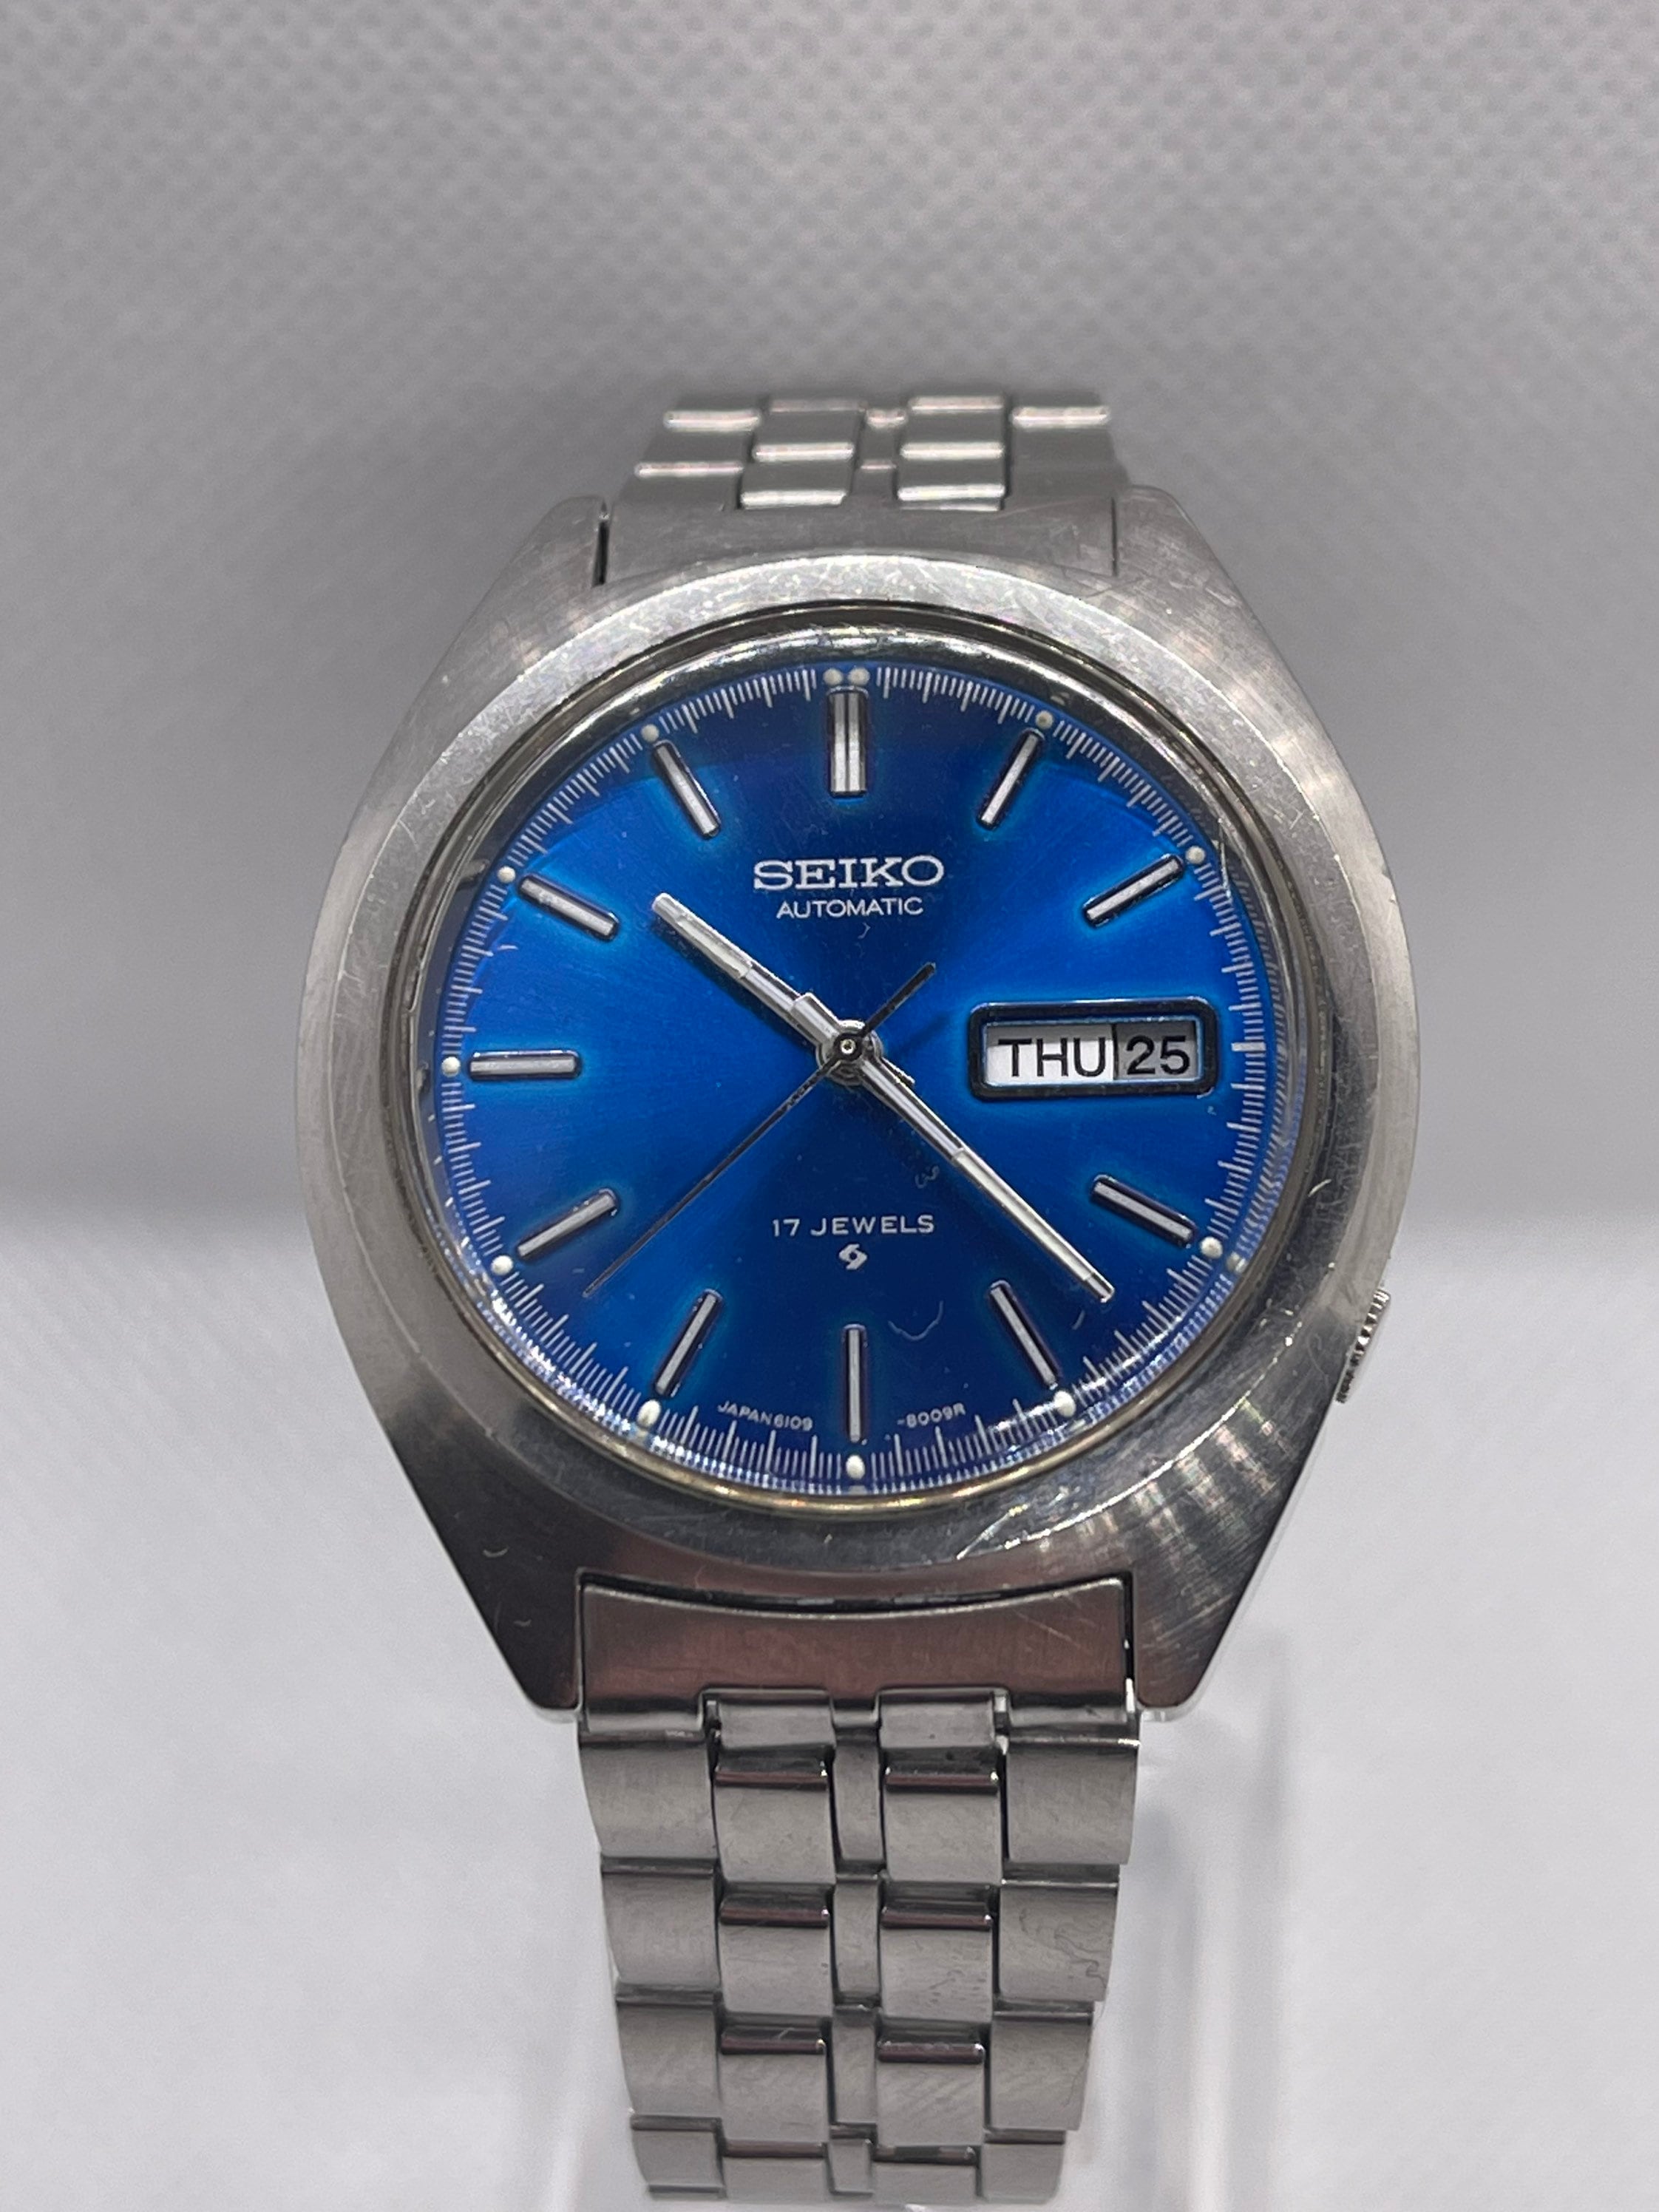 Vintage Seiko 6109-8009 Stainless Steel Watch With Beautiful - Etsy